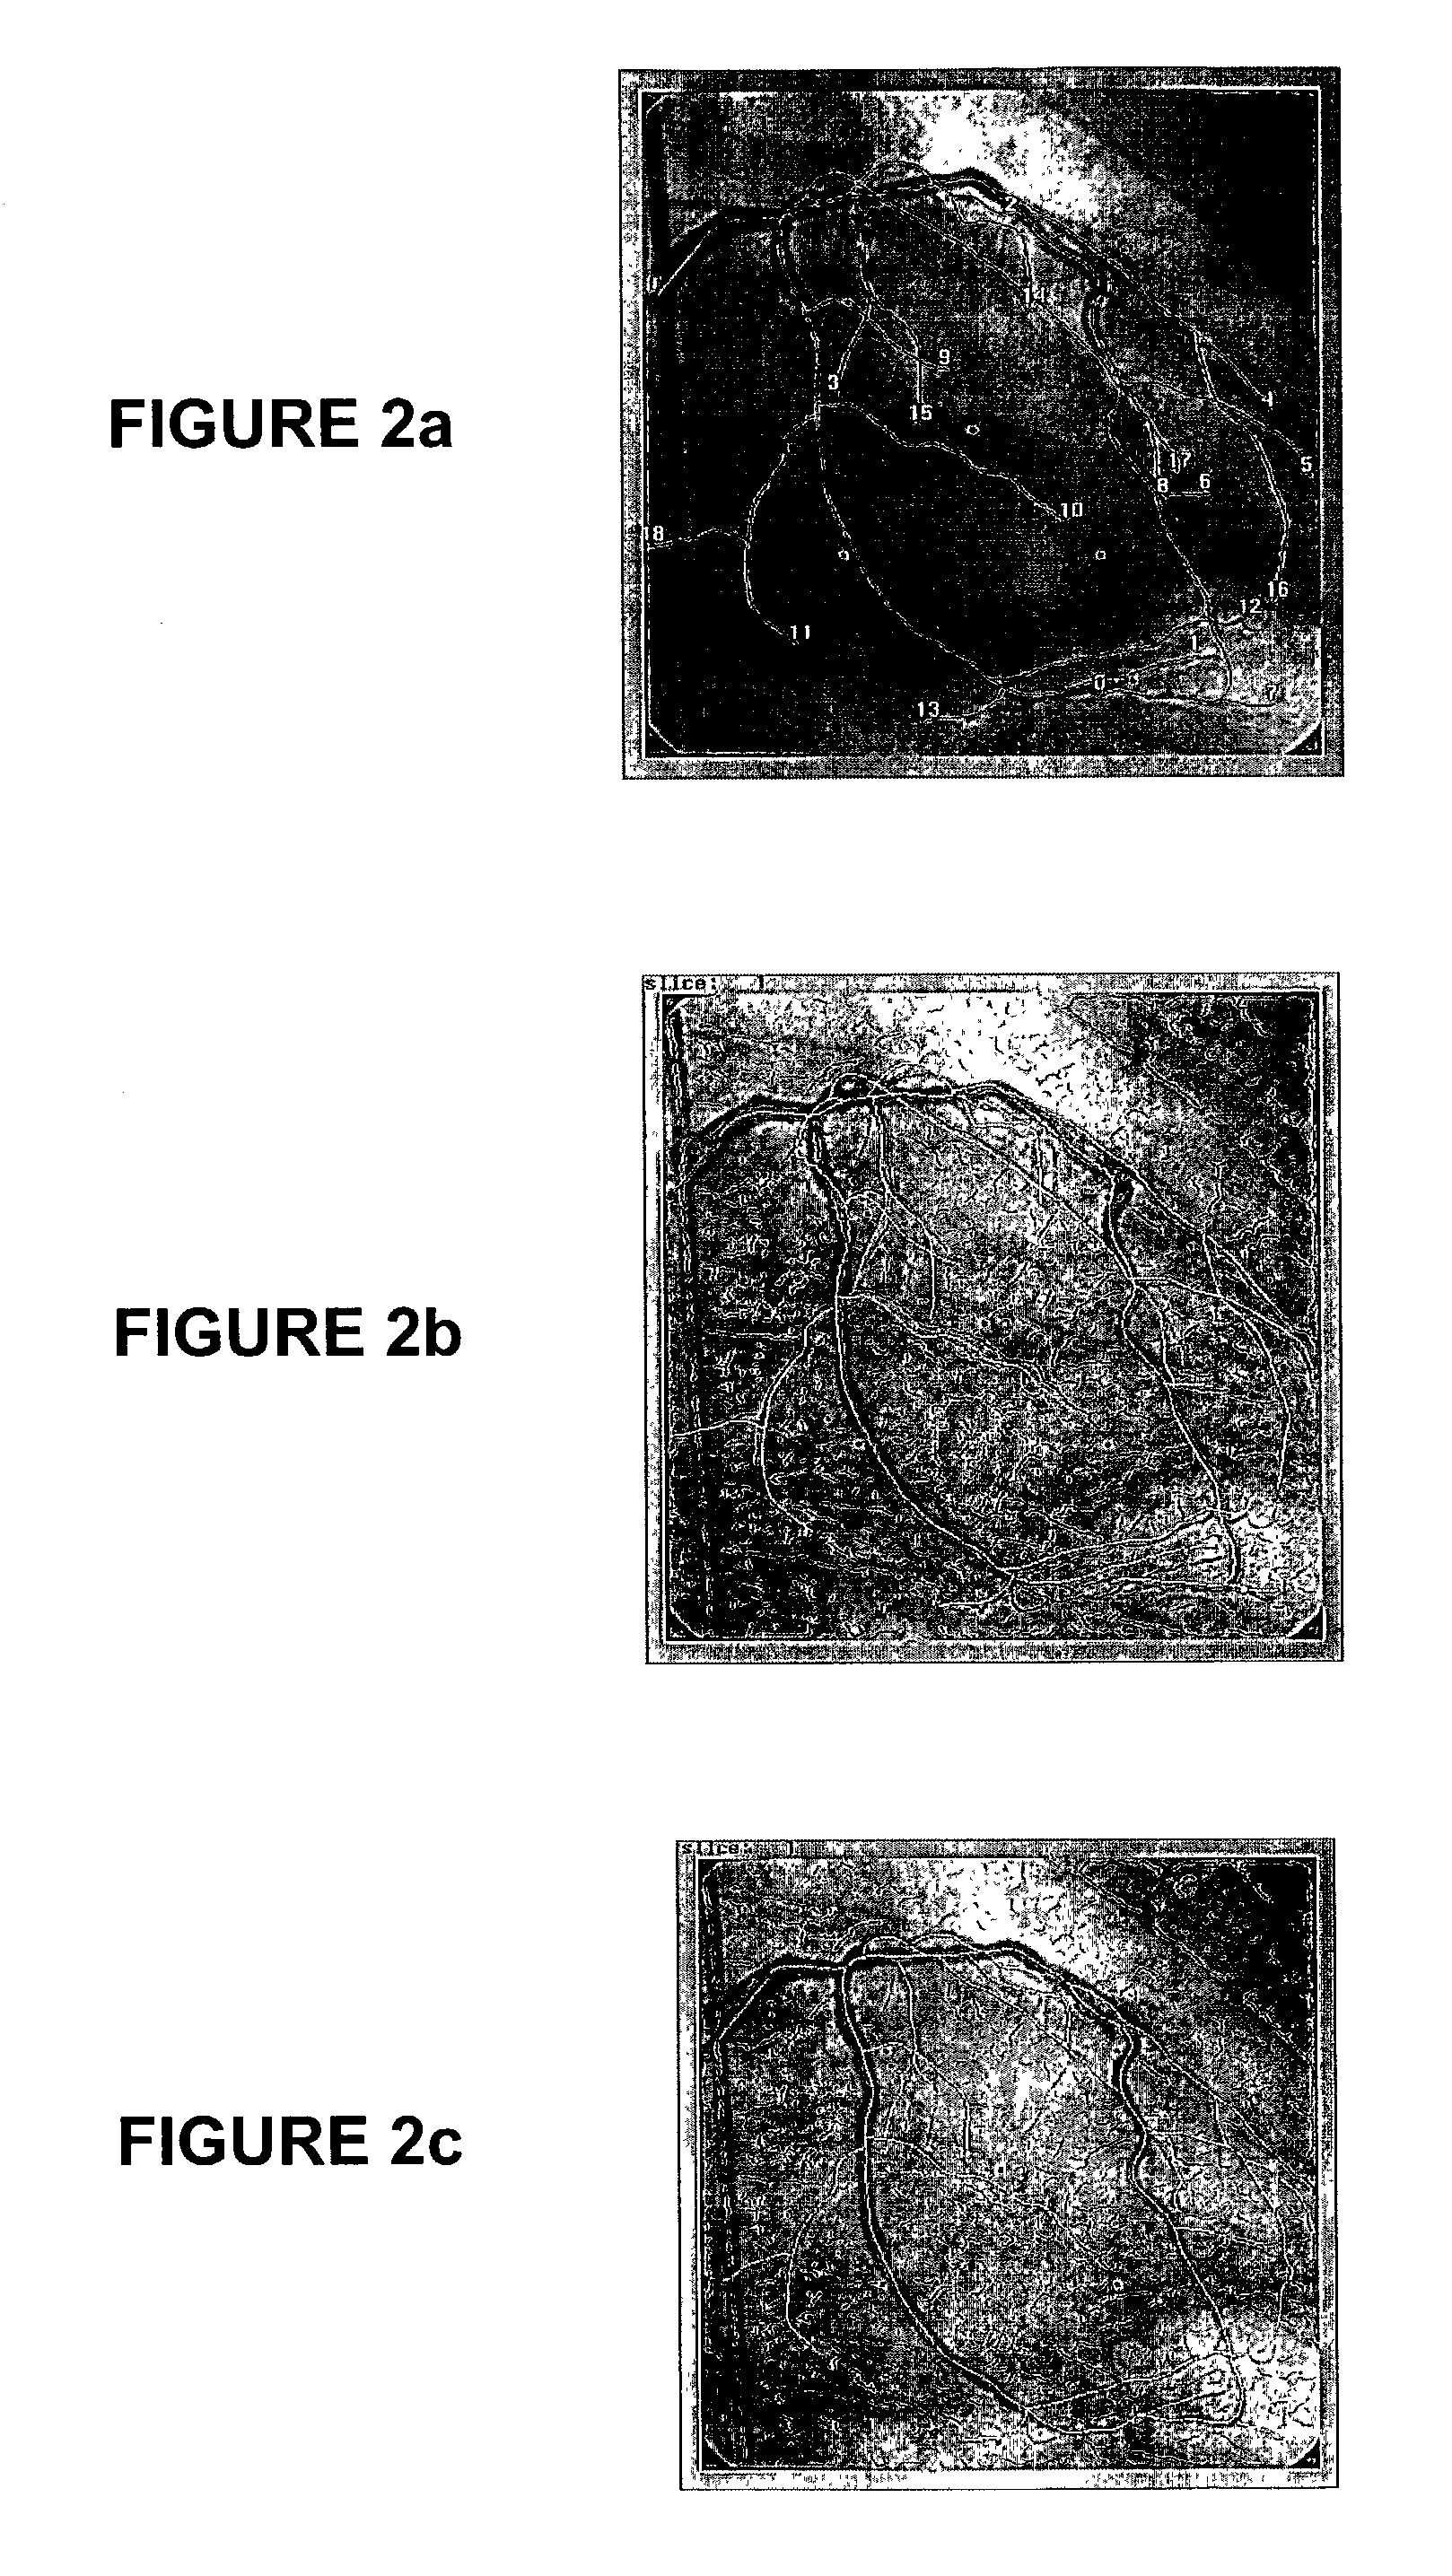 Methods and systems for display and analysis of moving arterial tree structures